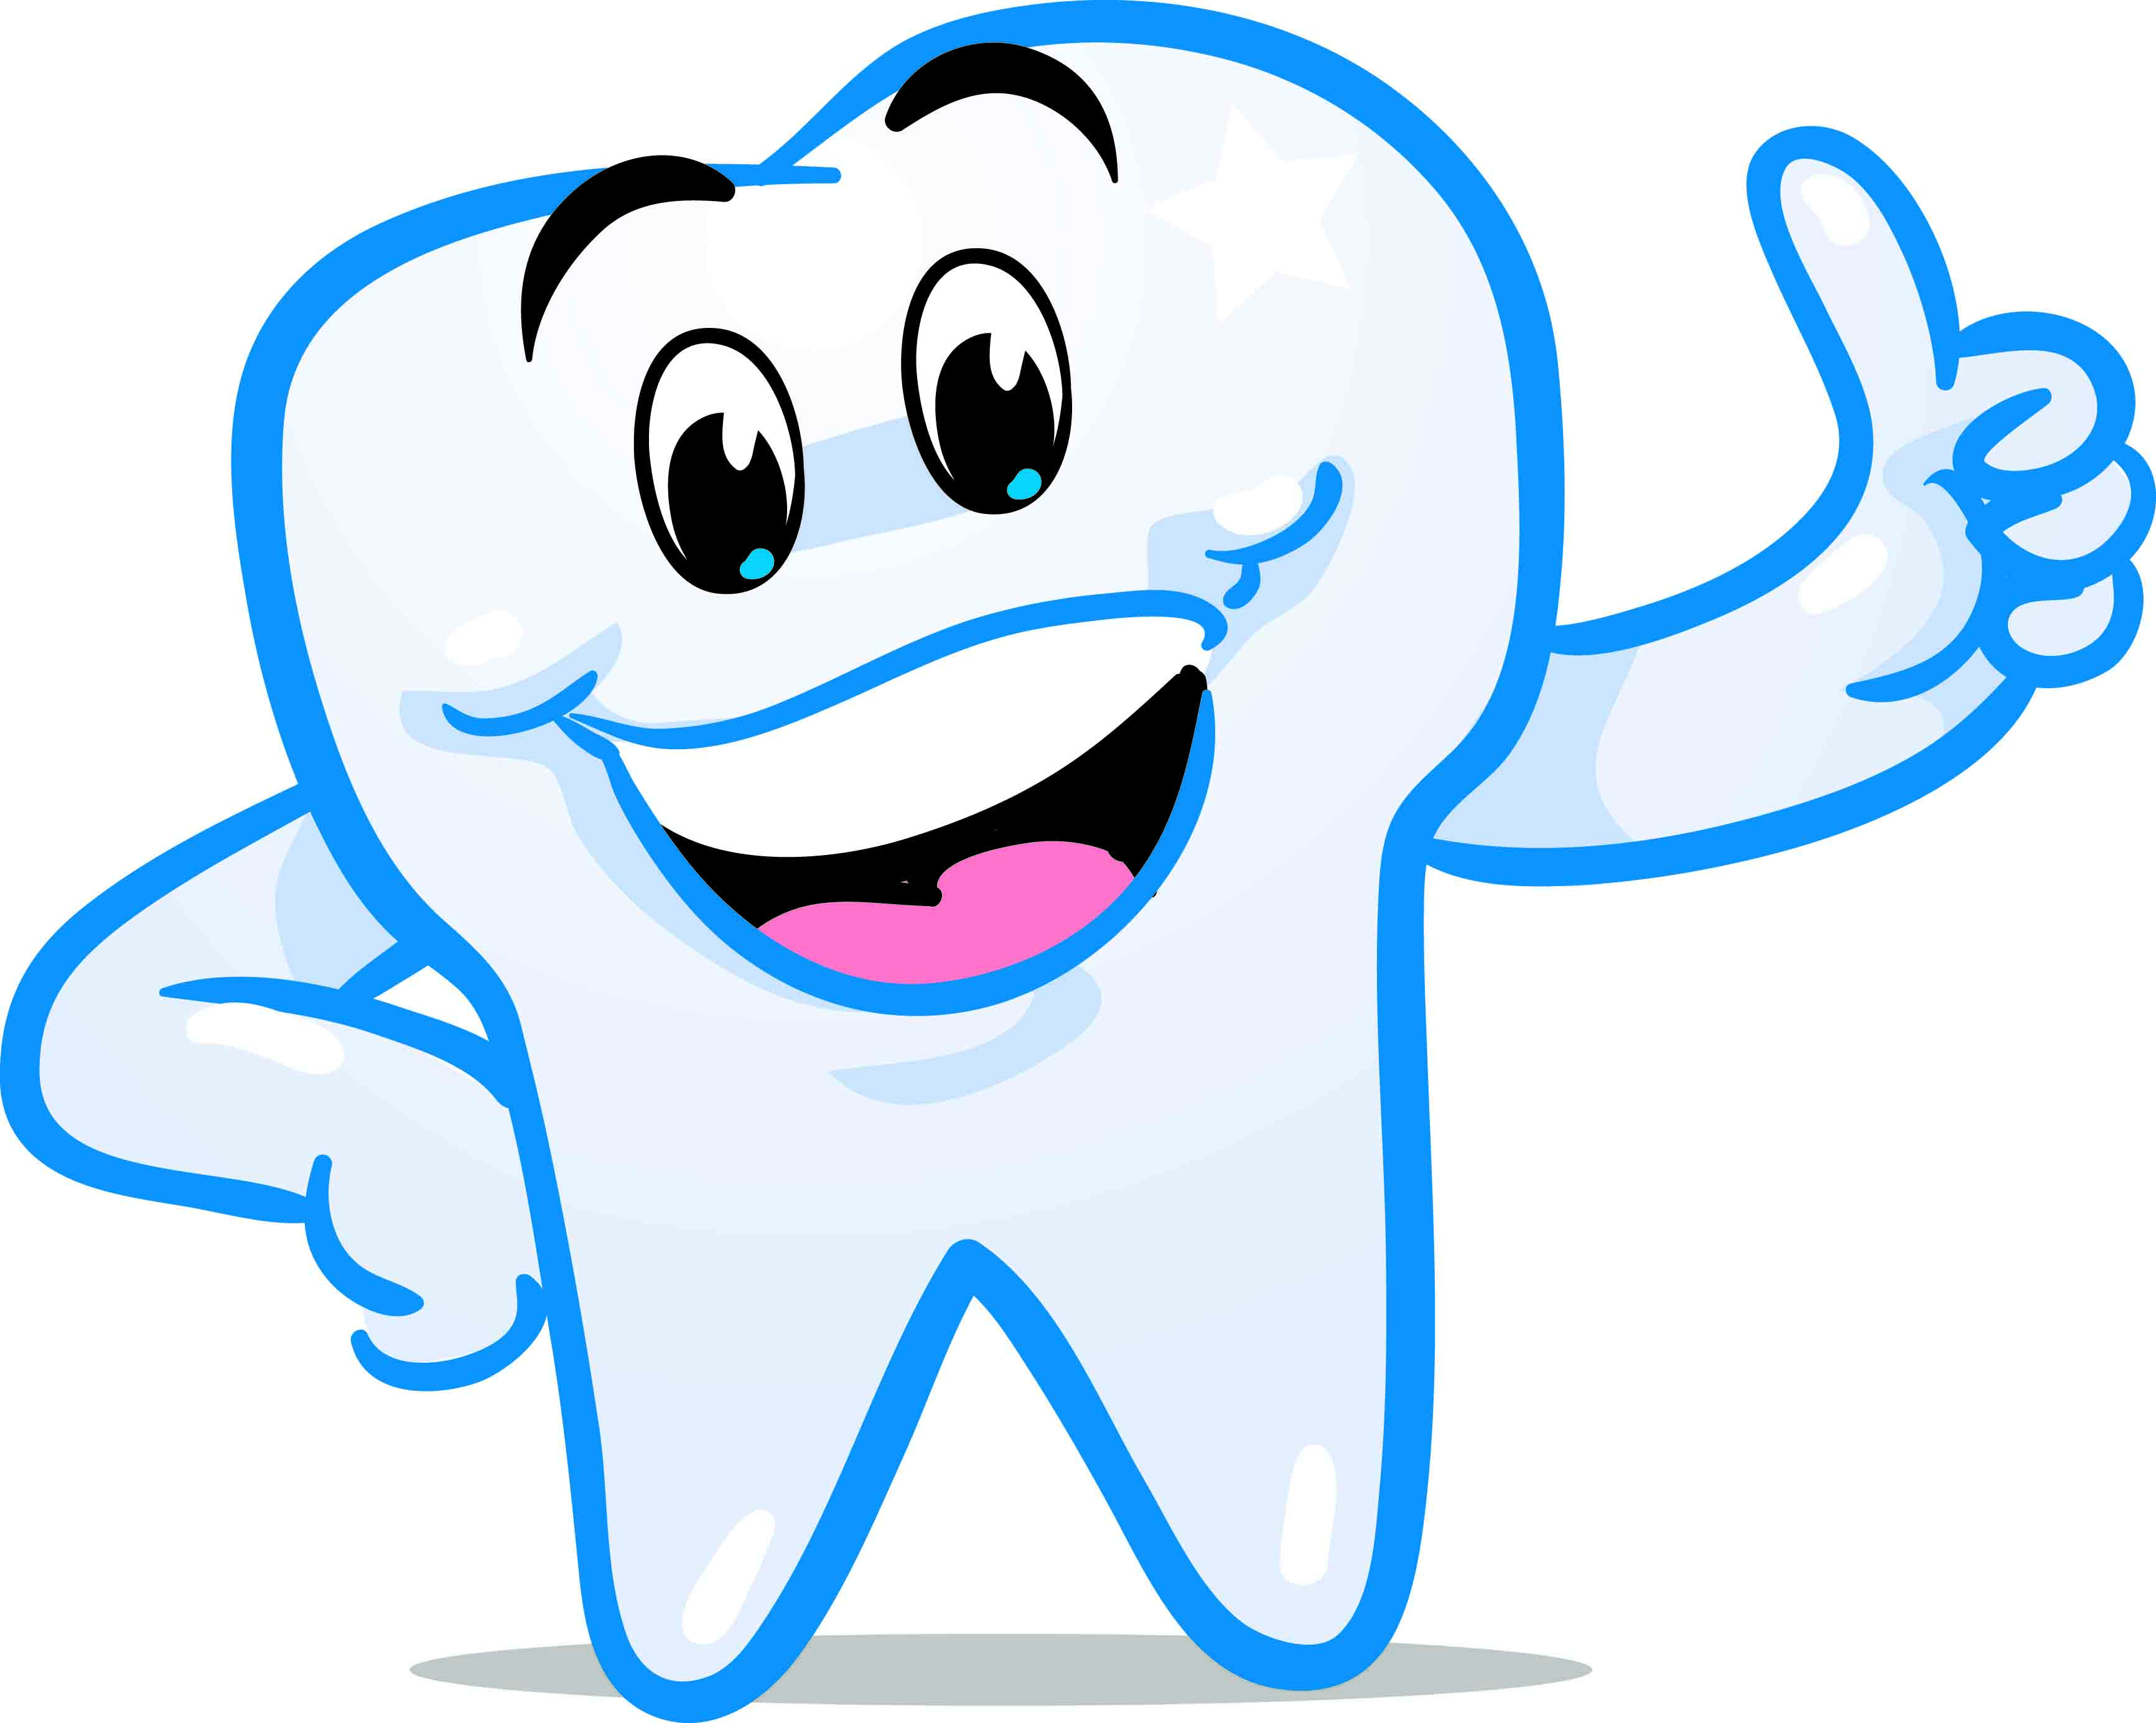 Free Tooth Smile Cliparts, Download Free Clip Art, Free Clip.